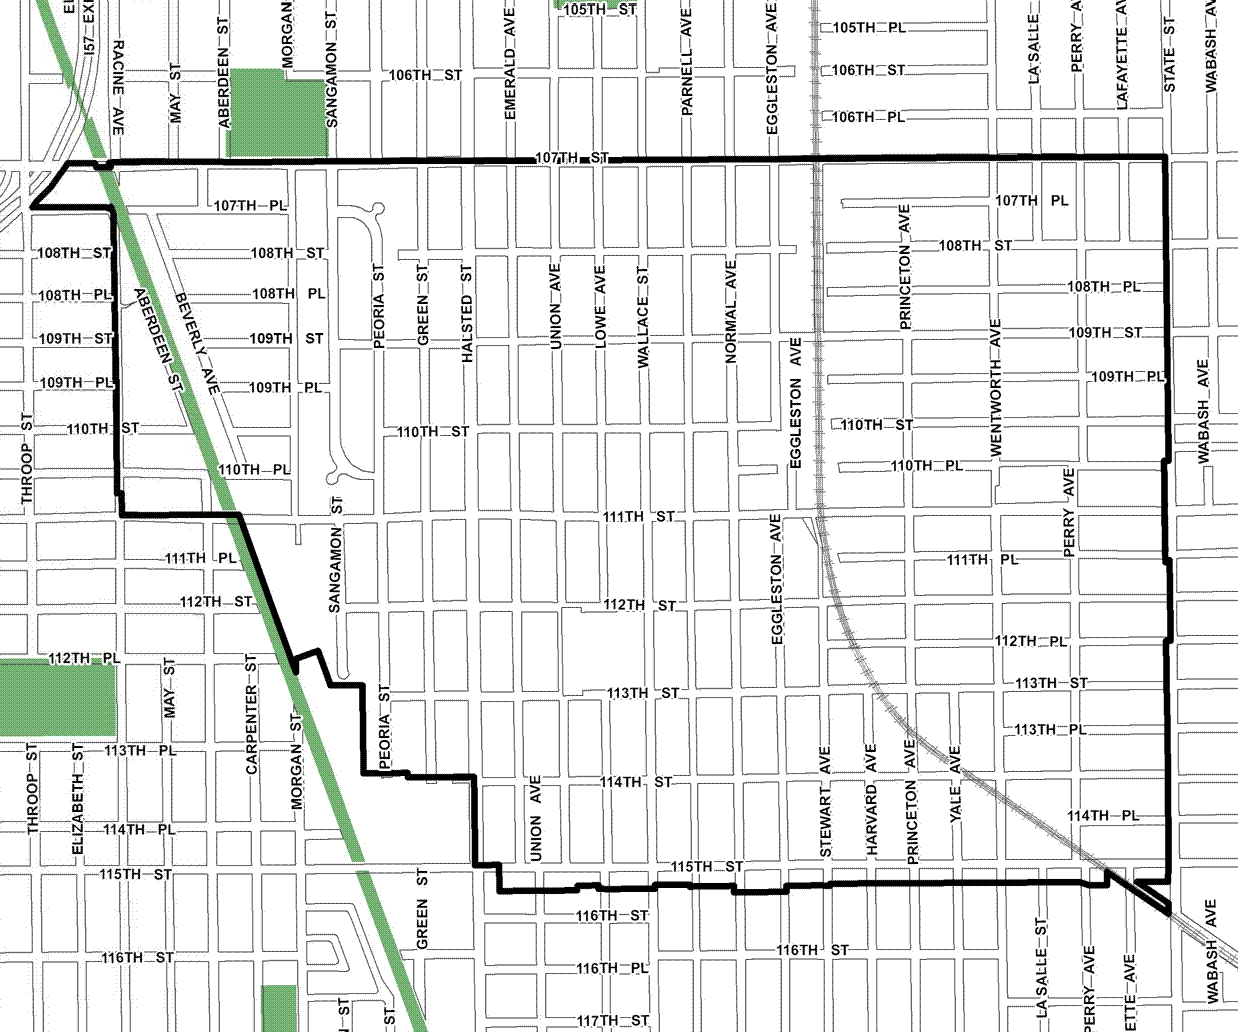 107th/Halsted TIF district, roughly bounded on the north by 107th Street, 115th Street on the south, State Street on the east and Racine Avenue on the west.